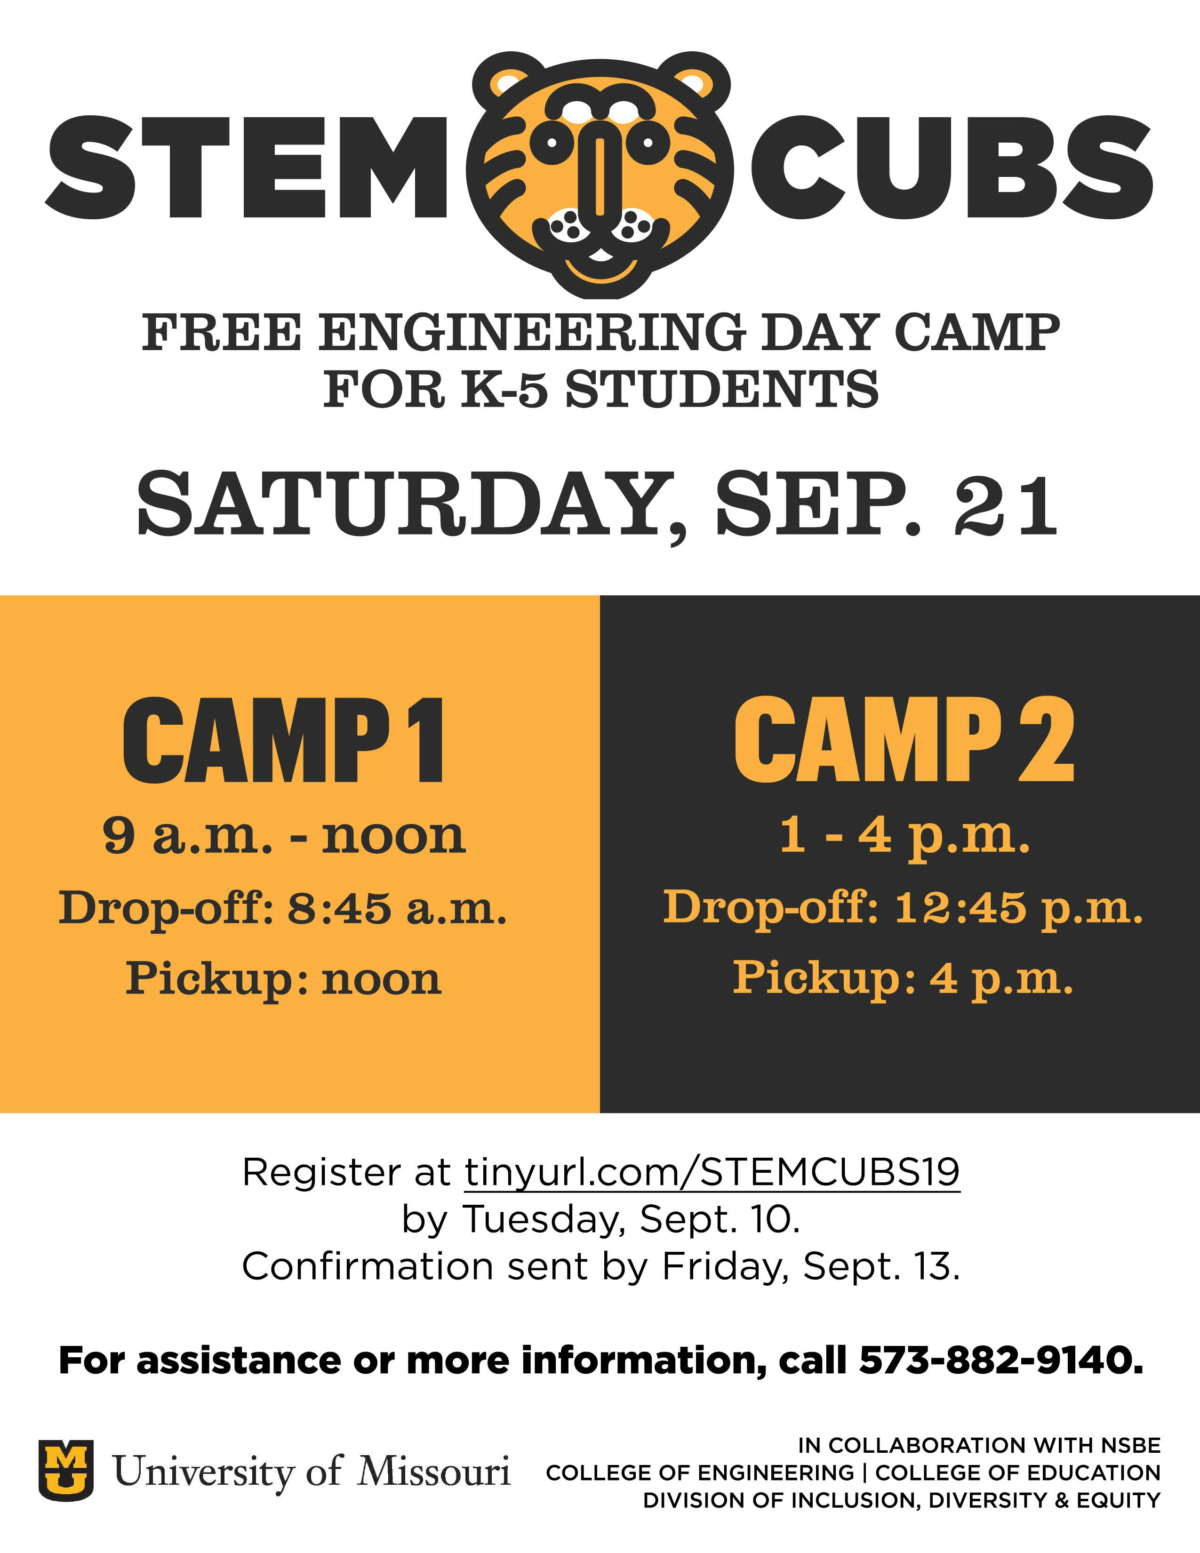 STEM Cubs flyer with all text material transcribed into post image is embedded in.